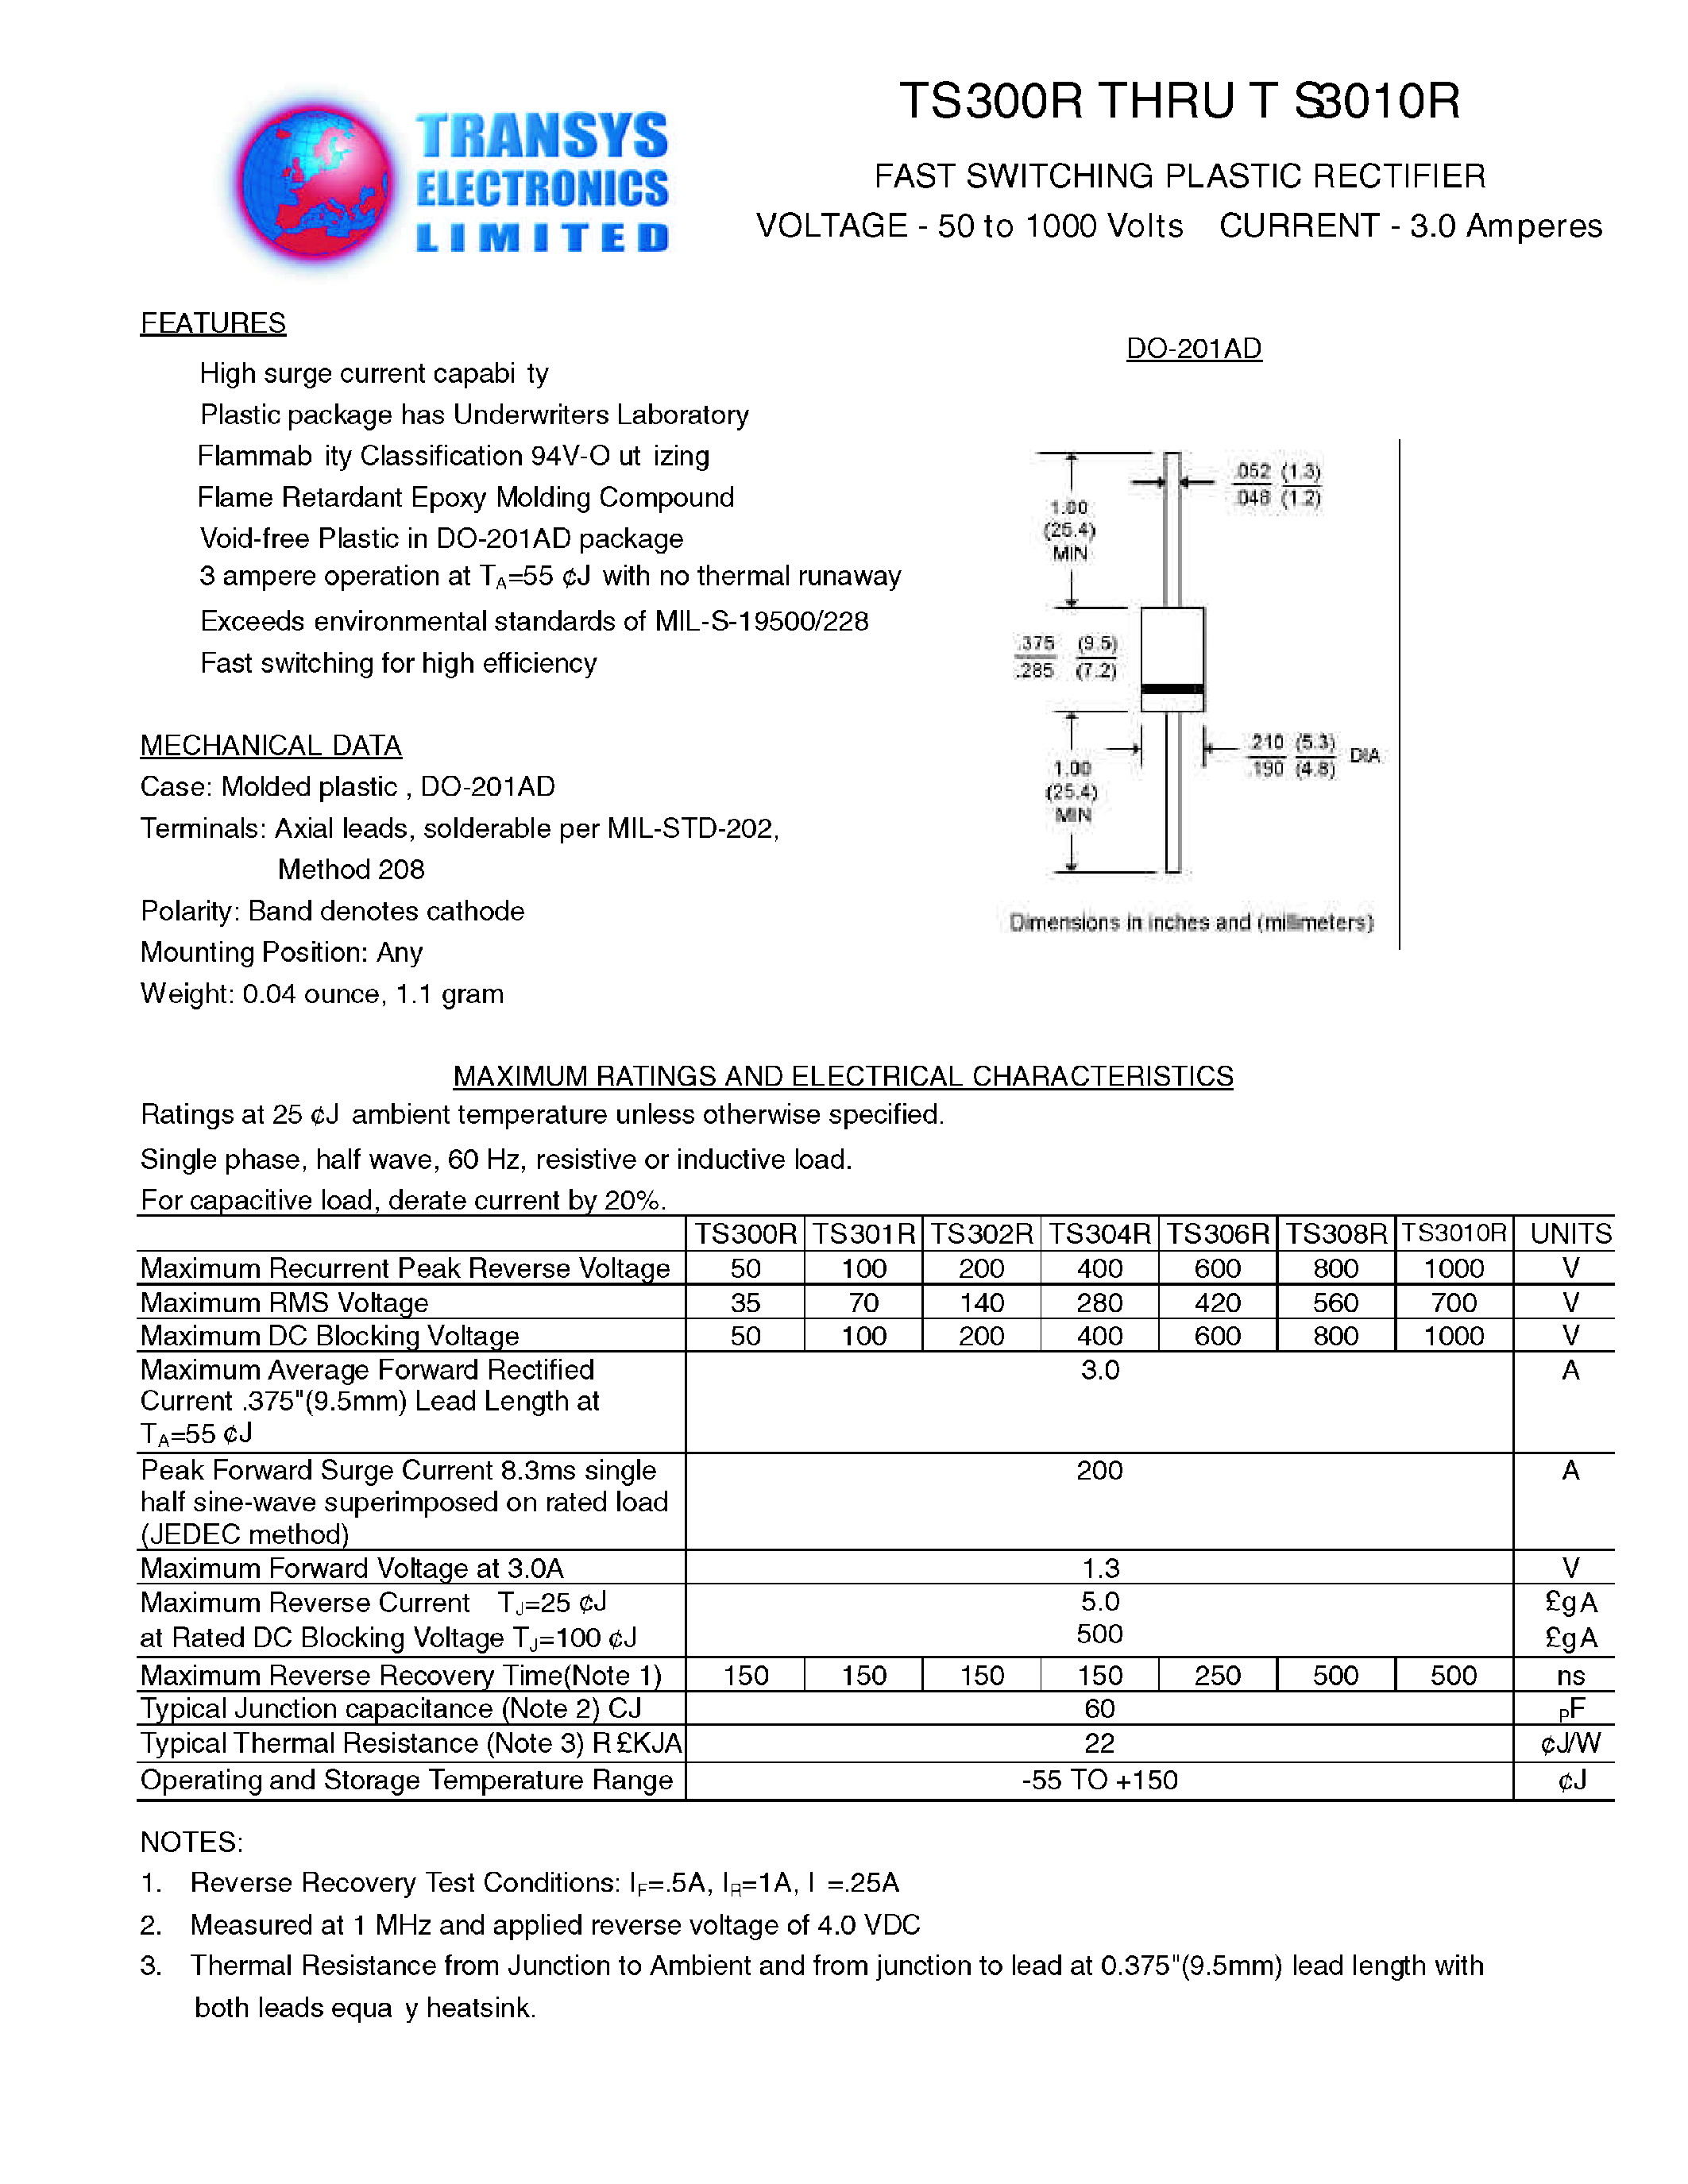 Datasheet TS3010R - FAST SWITCHING PLASTIC RECTIFIER page 1